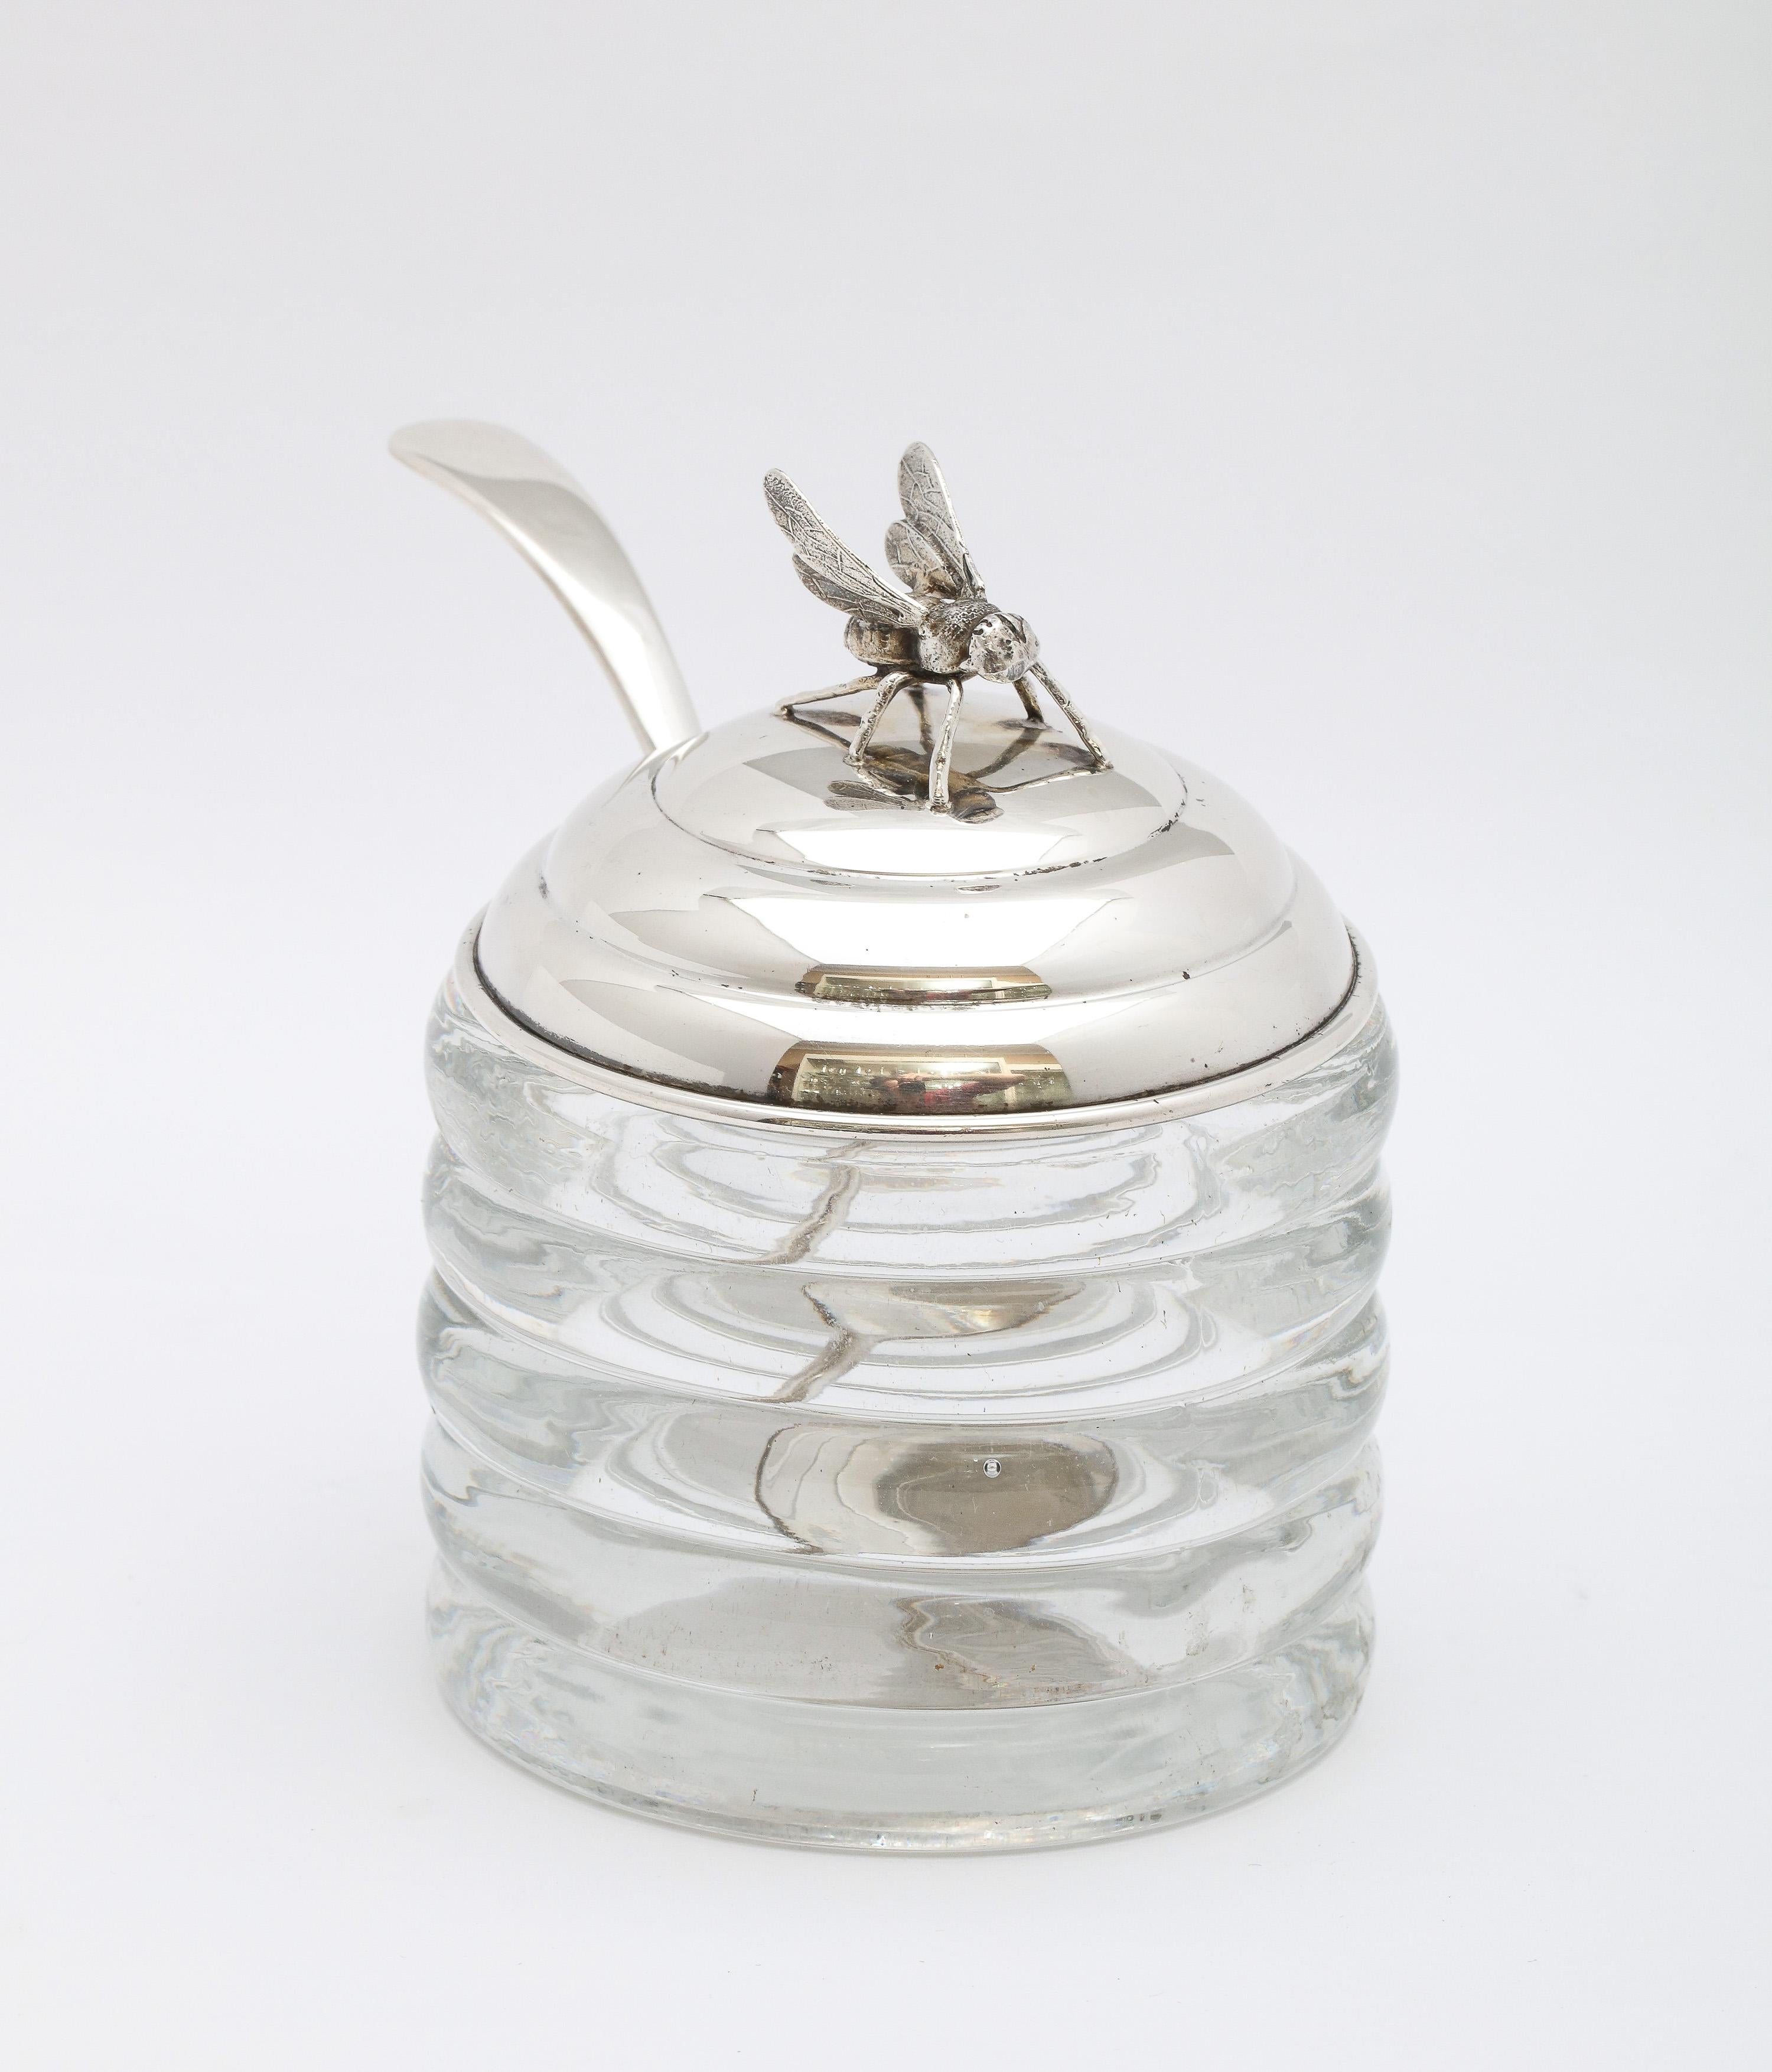 Art Deco Period Sterling Silver-Mounted Honey Jar with Original Honey Spoon 1